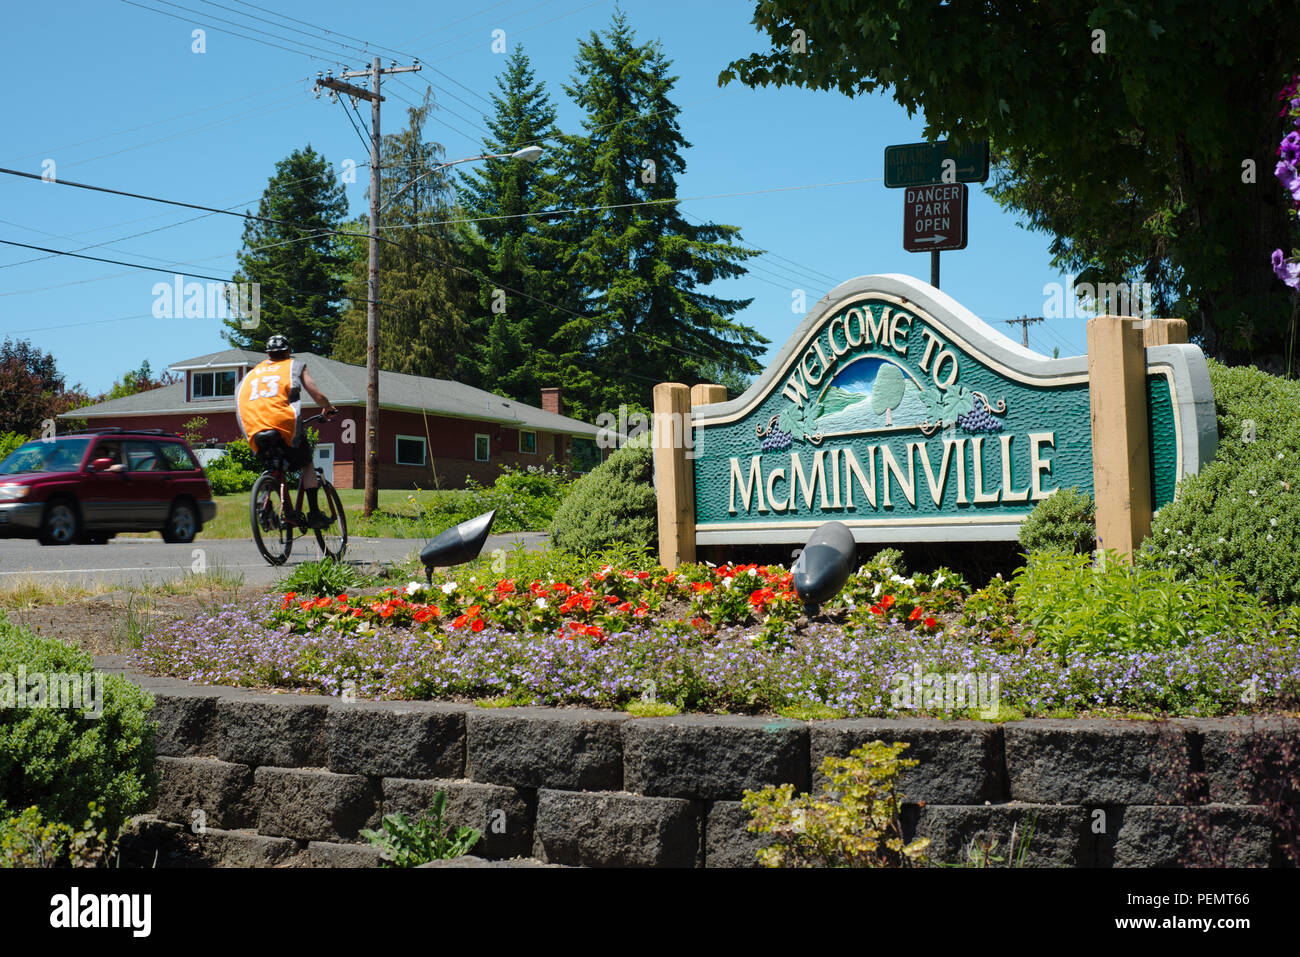 A roadside sign welcoming people to the city of McMinnville surrounded by planted flowers. A car and a bicyclist are passing by Stock Photo